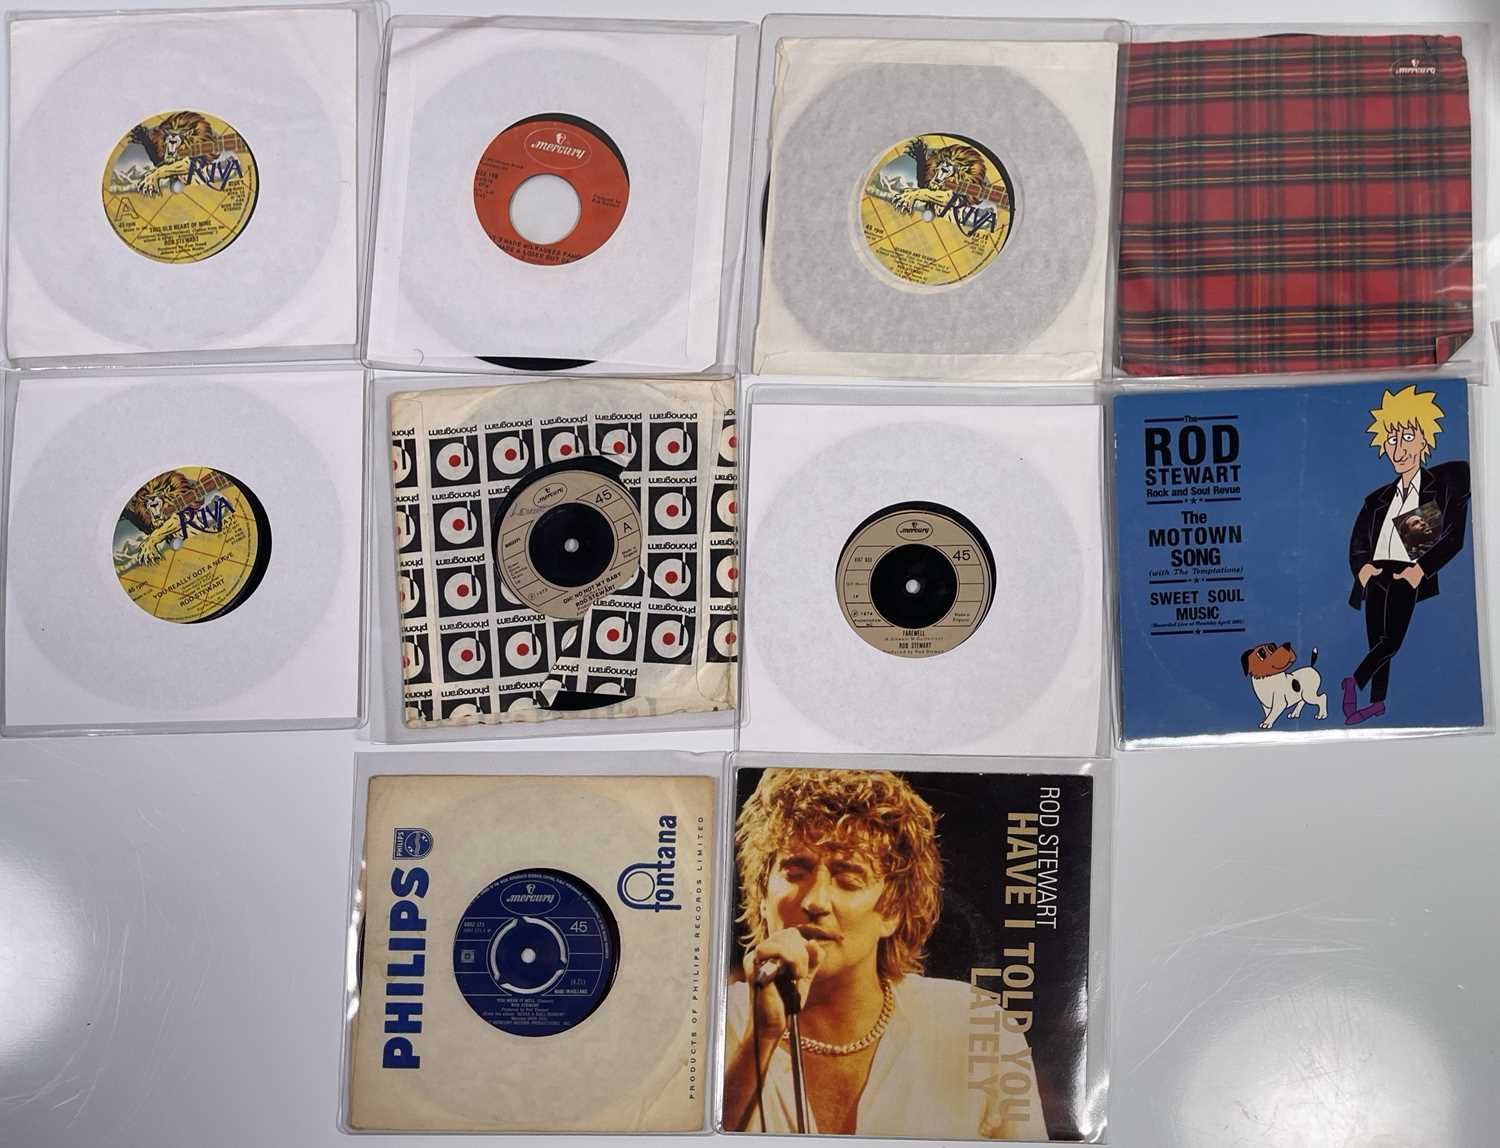 DANNY'S SINGLES - SMALL FACES AND RELATED. - Image 3 of 6